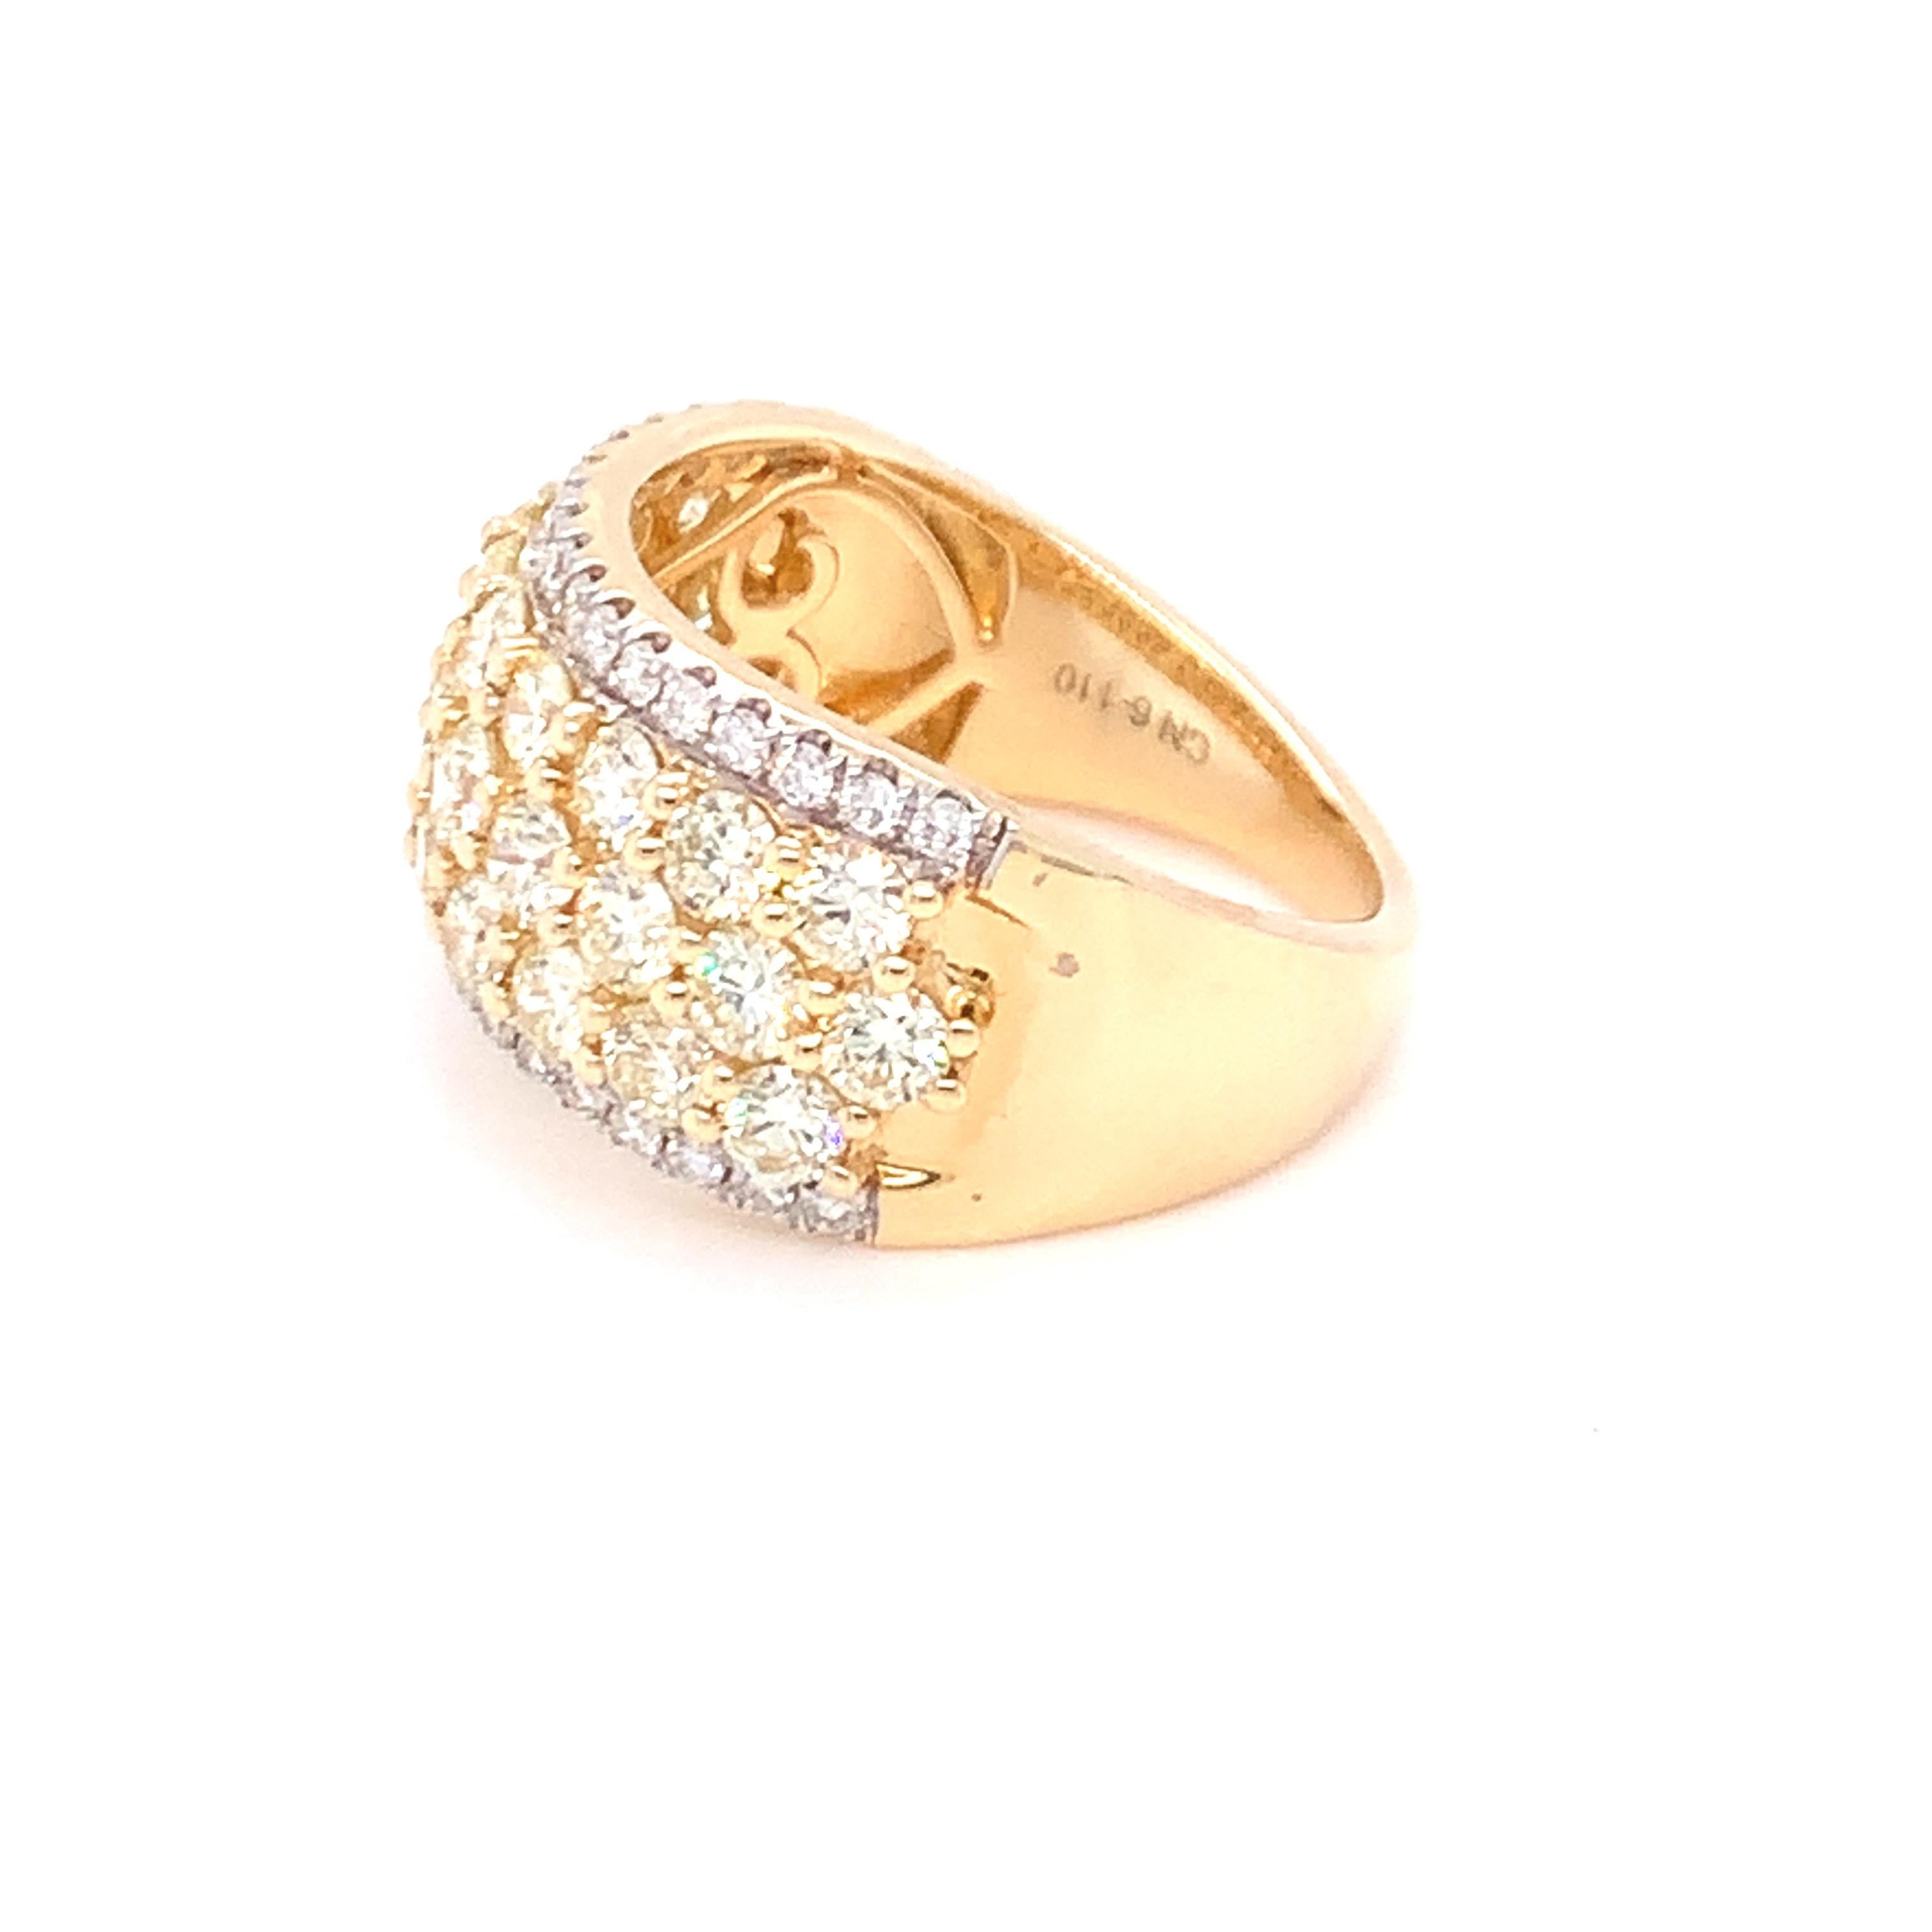 2.50 Carat Yellow & White Diamond Band Ring in 14k Yellow Gold For Sale 5